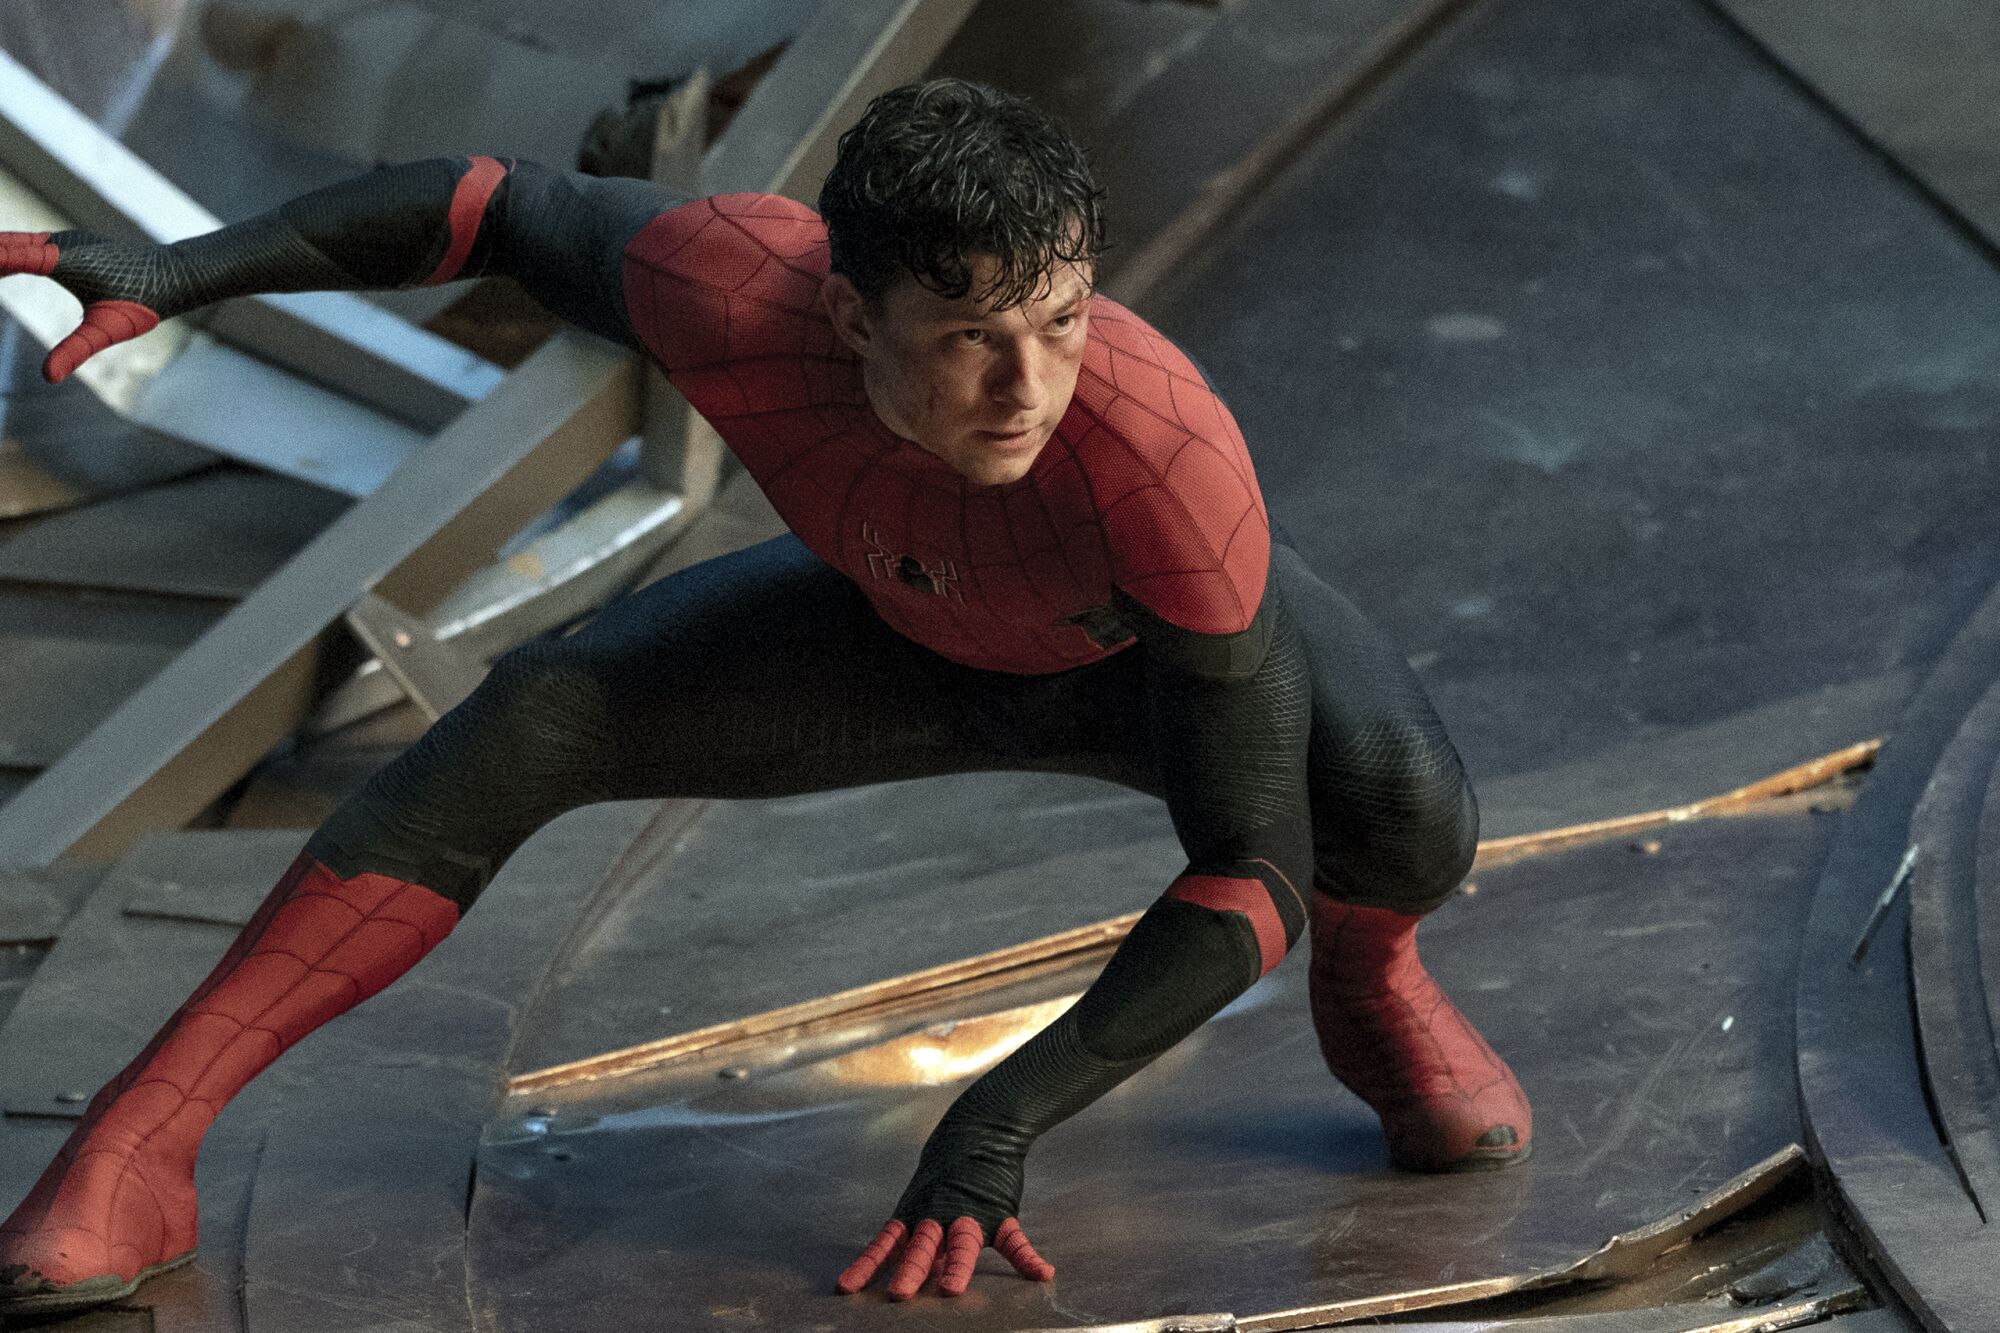 Tom Holland as Spider-Man crouches in a fighting stance in a scene from "Spider-Man: No Way Home."